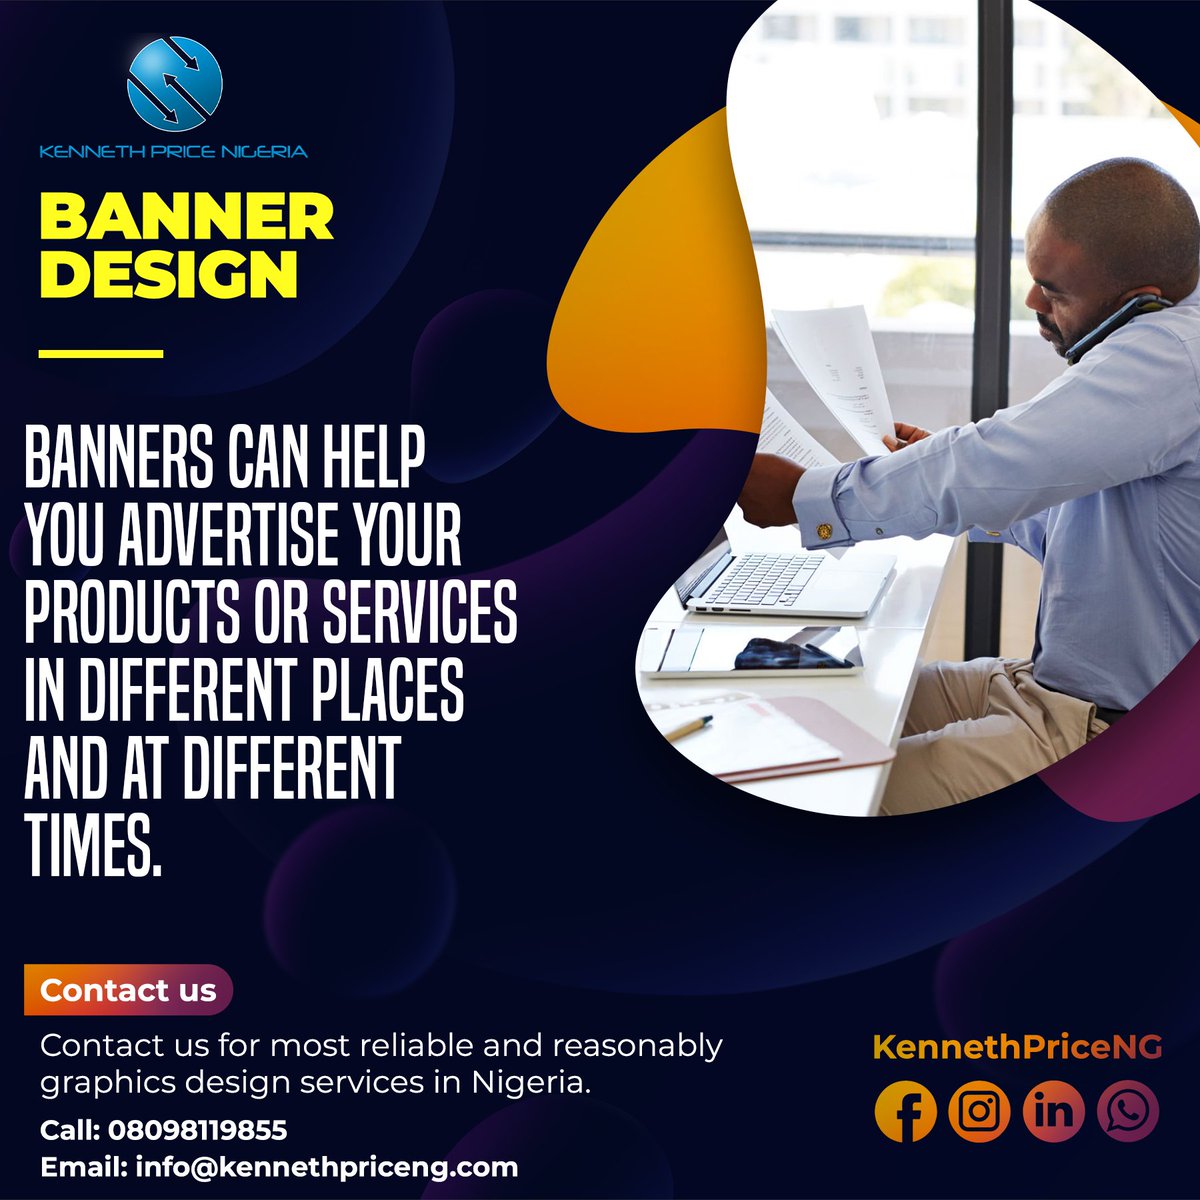 With ease our team can put together unique banners to help advertise any type of product in different niches at any place and any given time.
#banneradvertising #BrandIdentity #DigitalExperience #bannerdesign #graphicdesign #brandbuilding #marketingagency #digitalmarketingagency